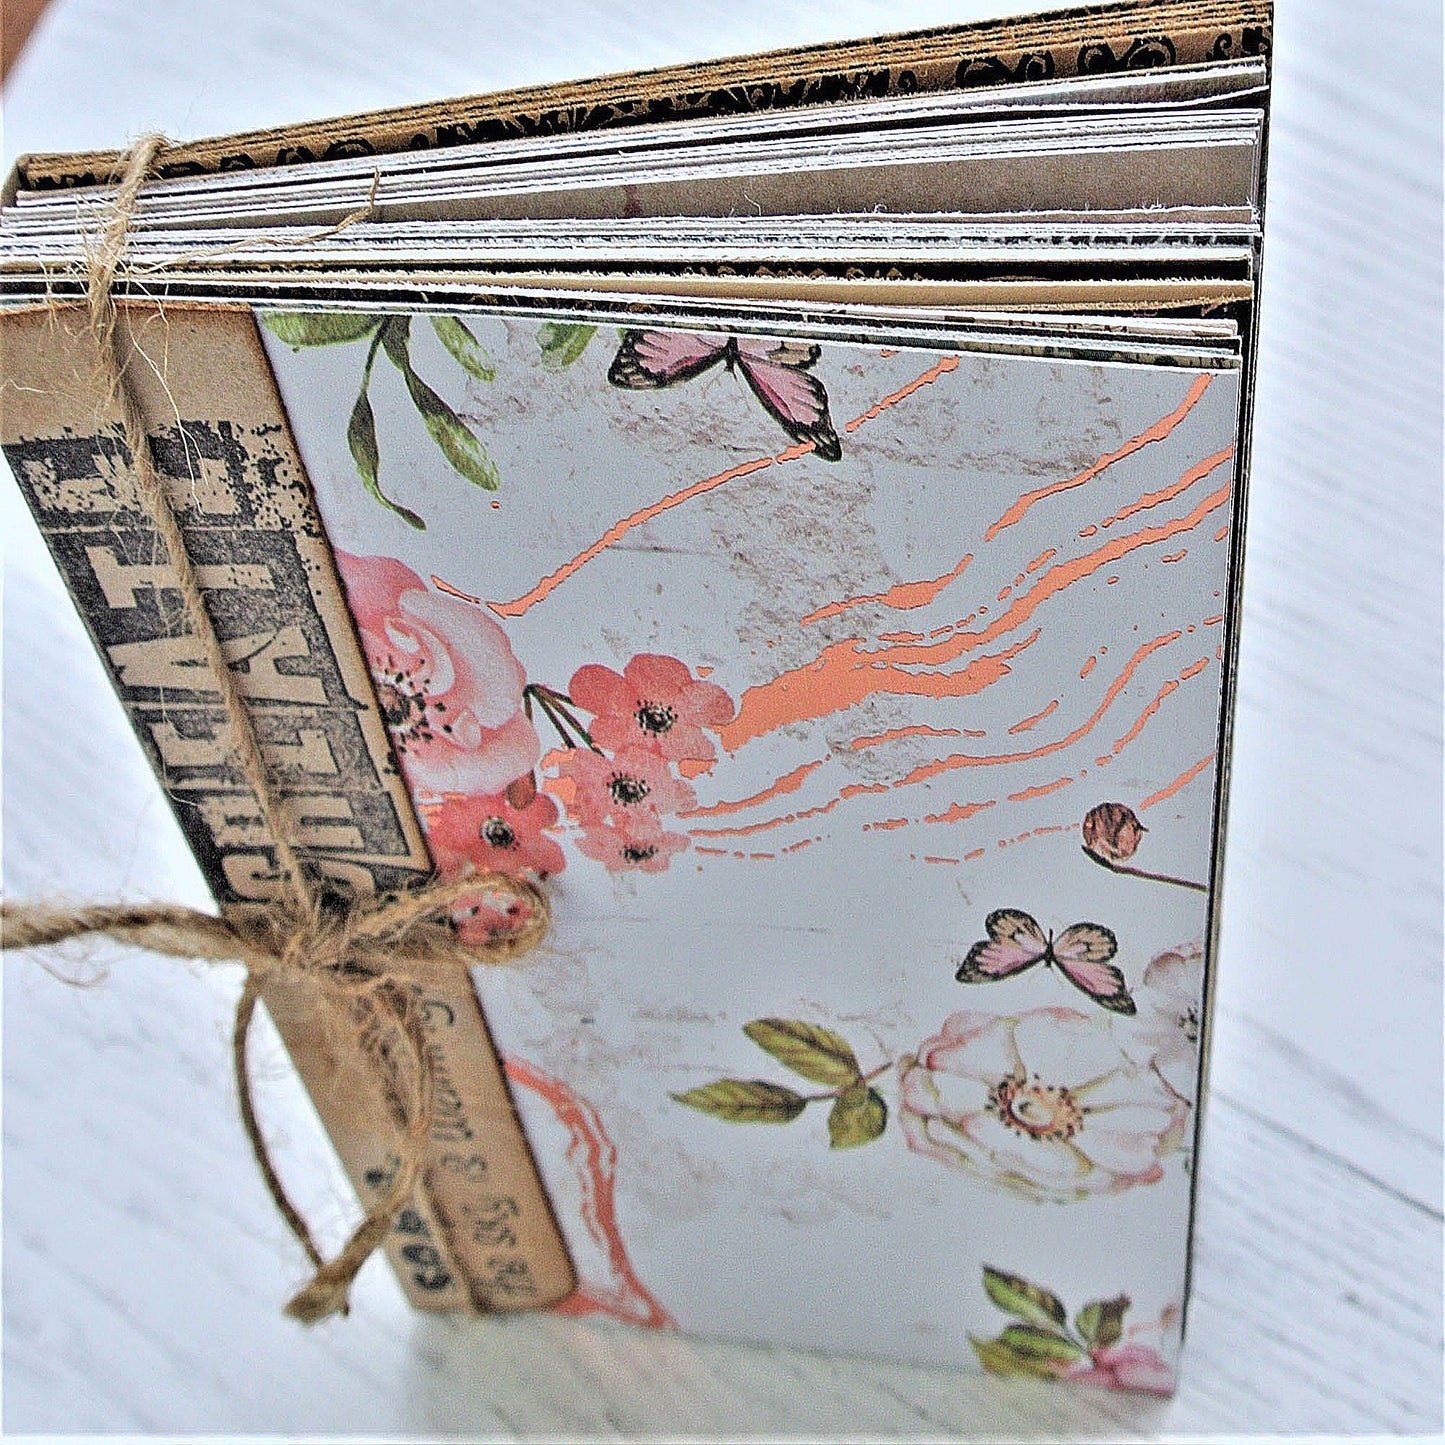 Little Bliss Pocket-Sized Paper Pack for on-the-go Crafting or as Happy Mail Gift